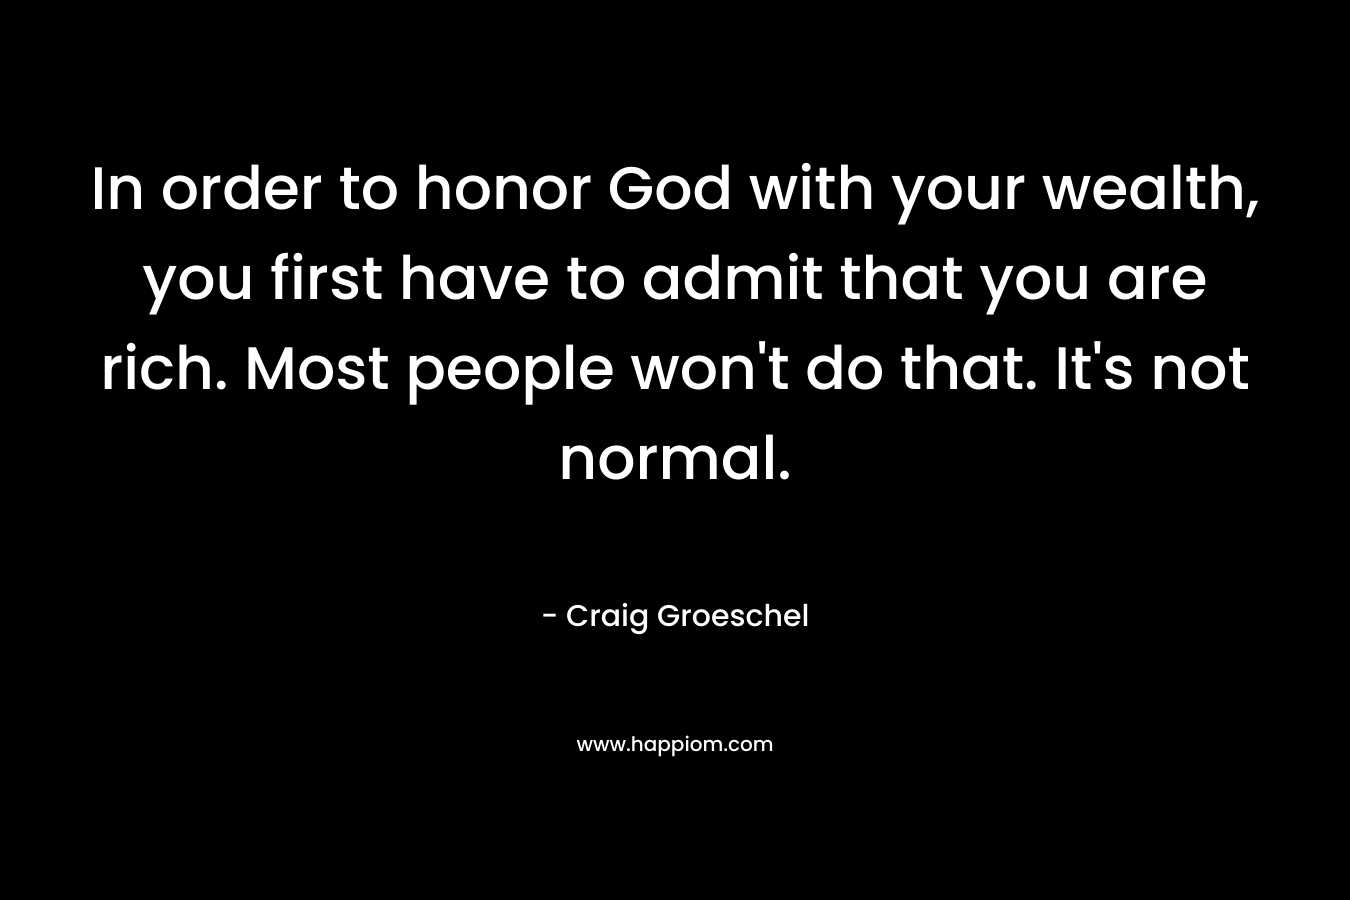 In order to honor God with your wealth, you first have to admit that you are rich. Most people won't do that. It's not normal.